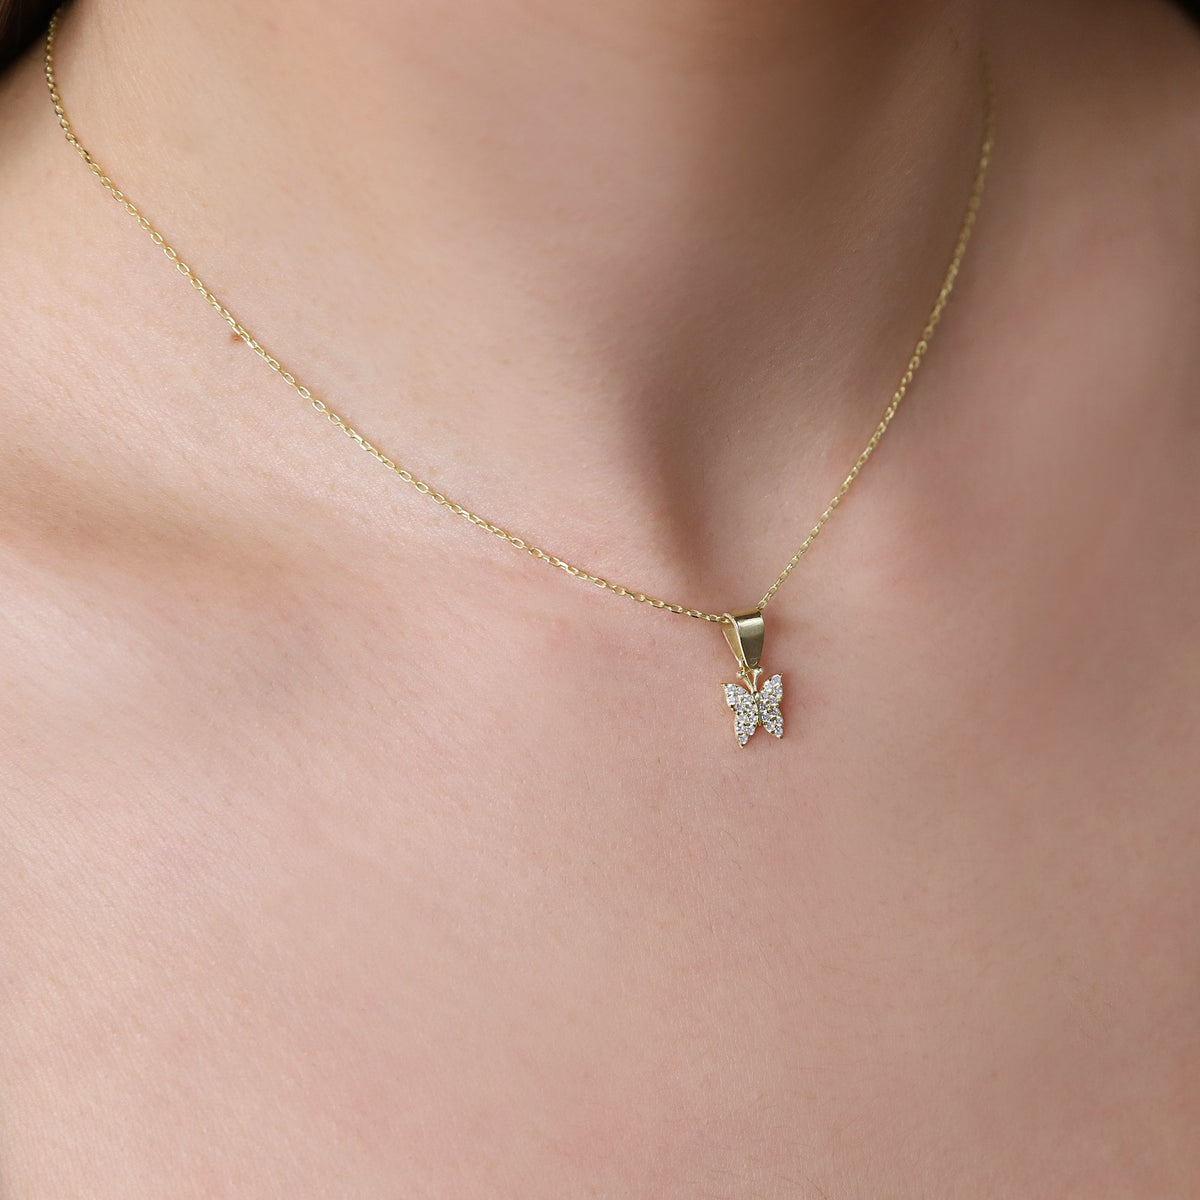 CZ Diamond Butterfly Necklace, Minimalist Charm Pendant, Additional Charms for Bracelet • Gold Jewelry • Gifts for Women • Anniversary Gift